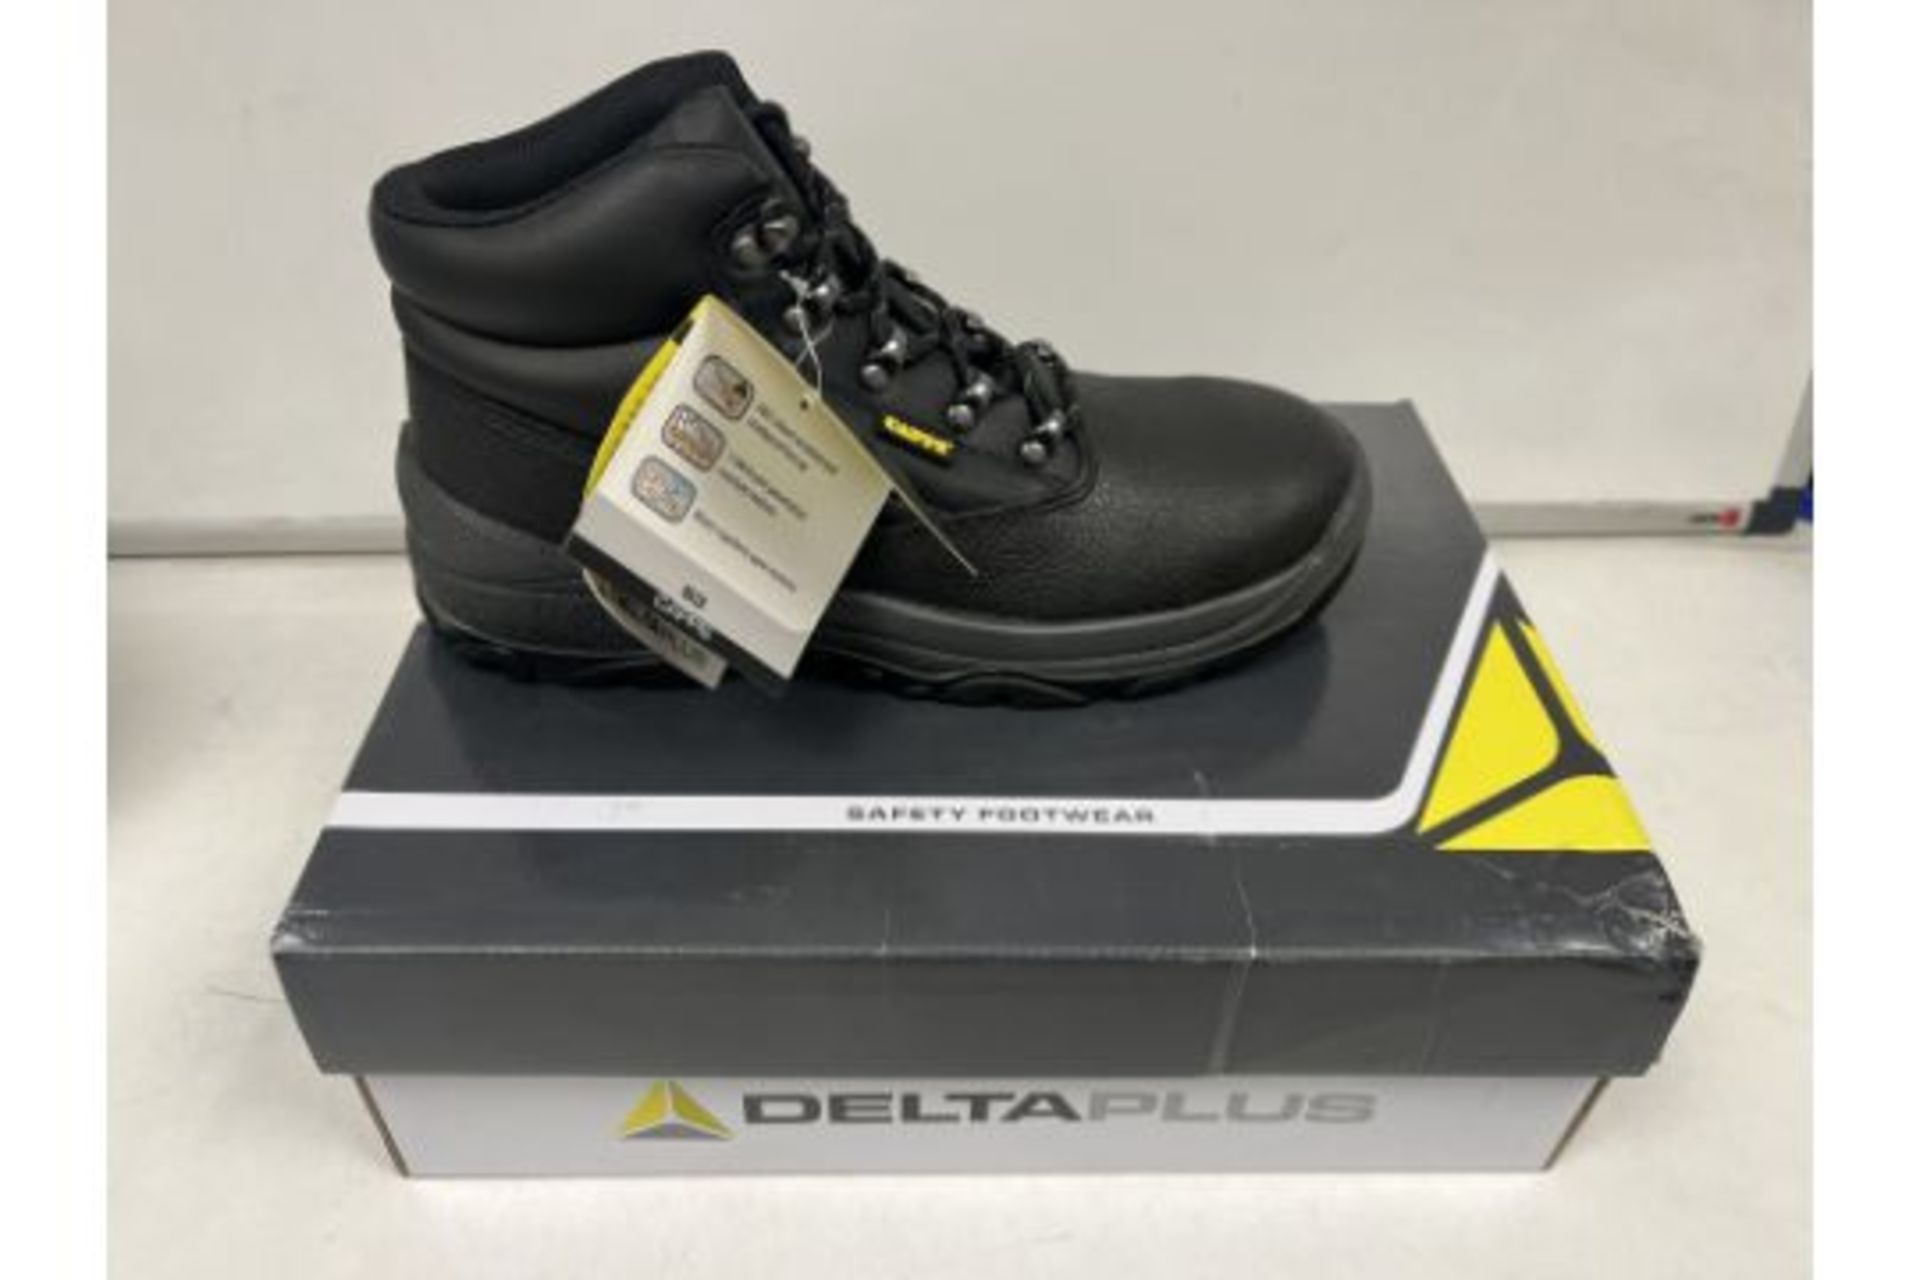 4 x NEW BOXED PAIRS OF DELTA PLUS S3 METAL TOE CAPPED WORK SAFETY BOOTS. SIZE UK 10. (ROW19RACK)